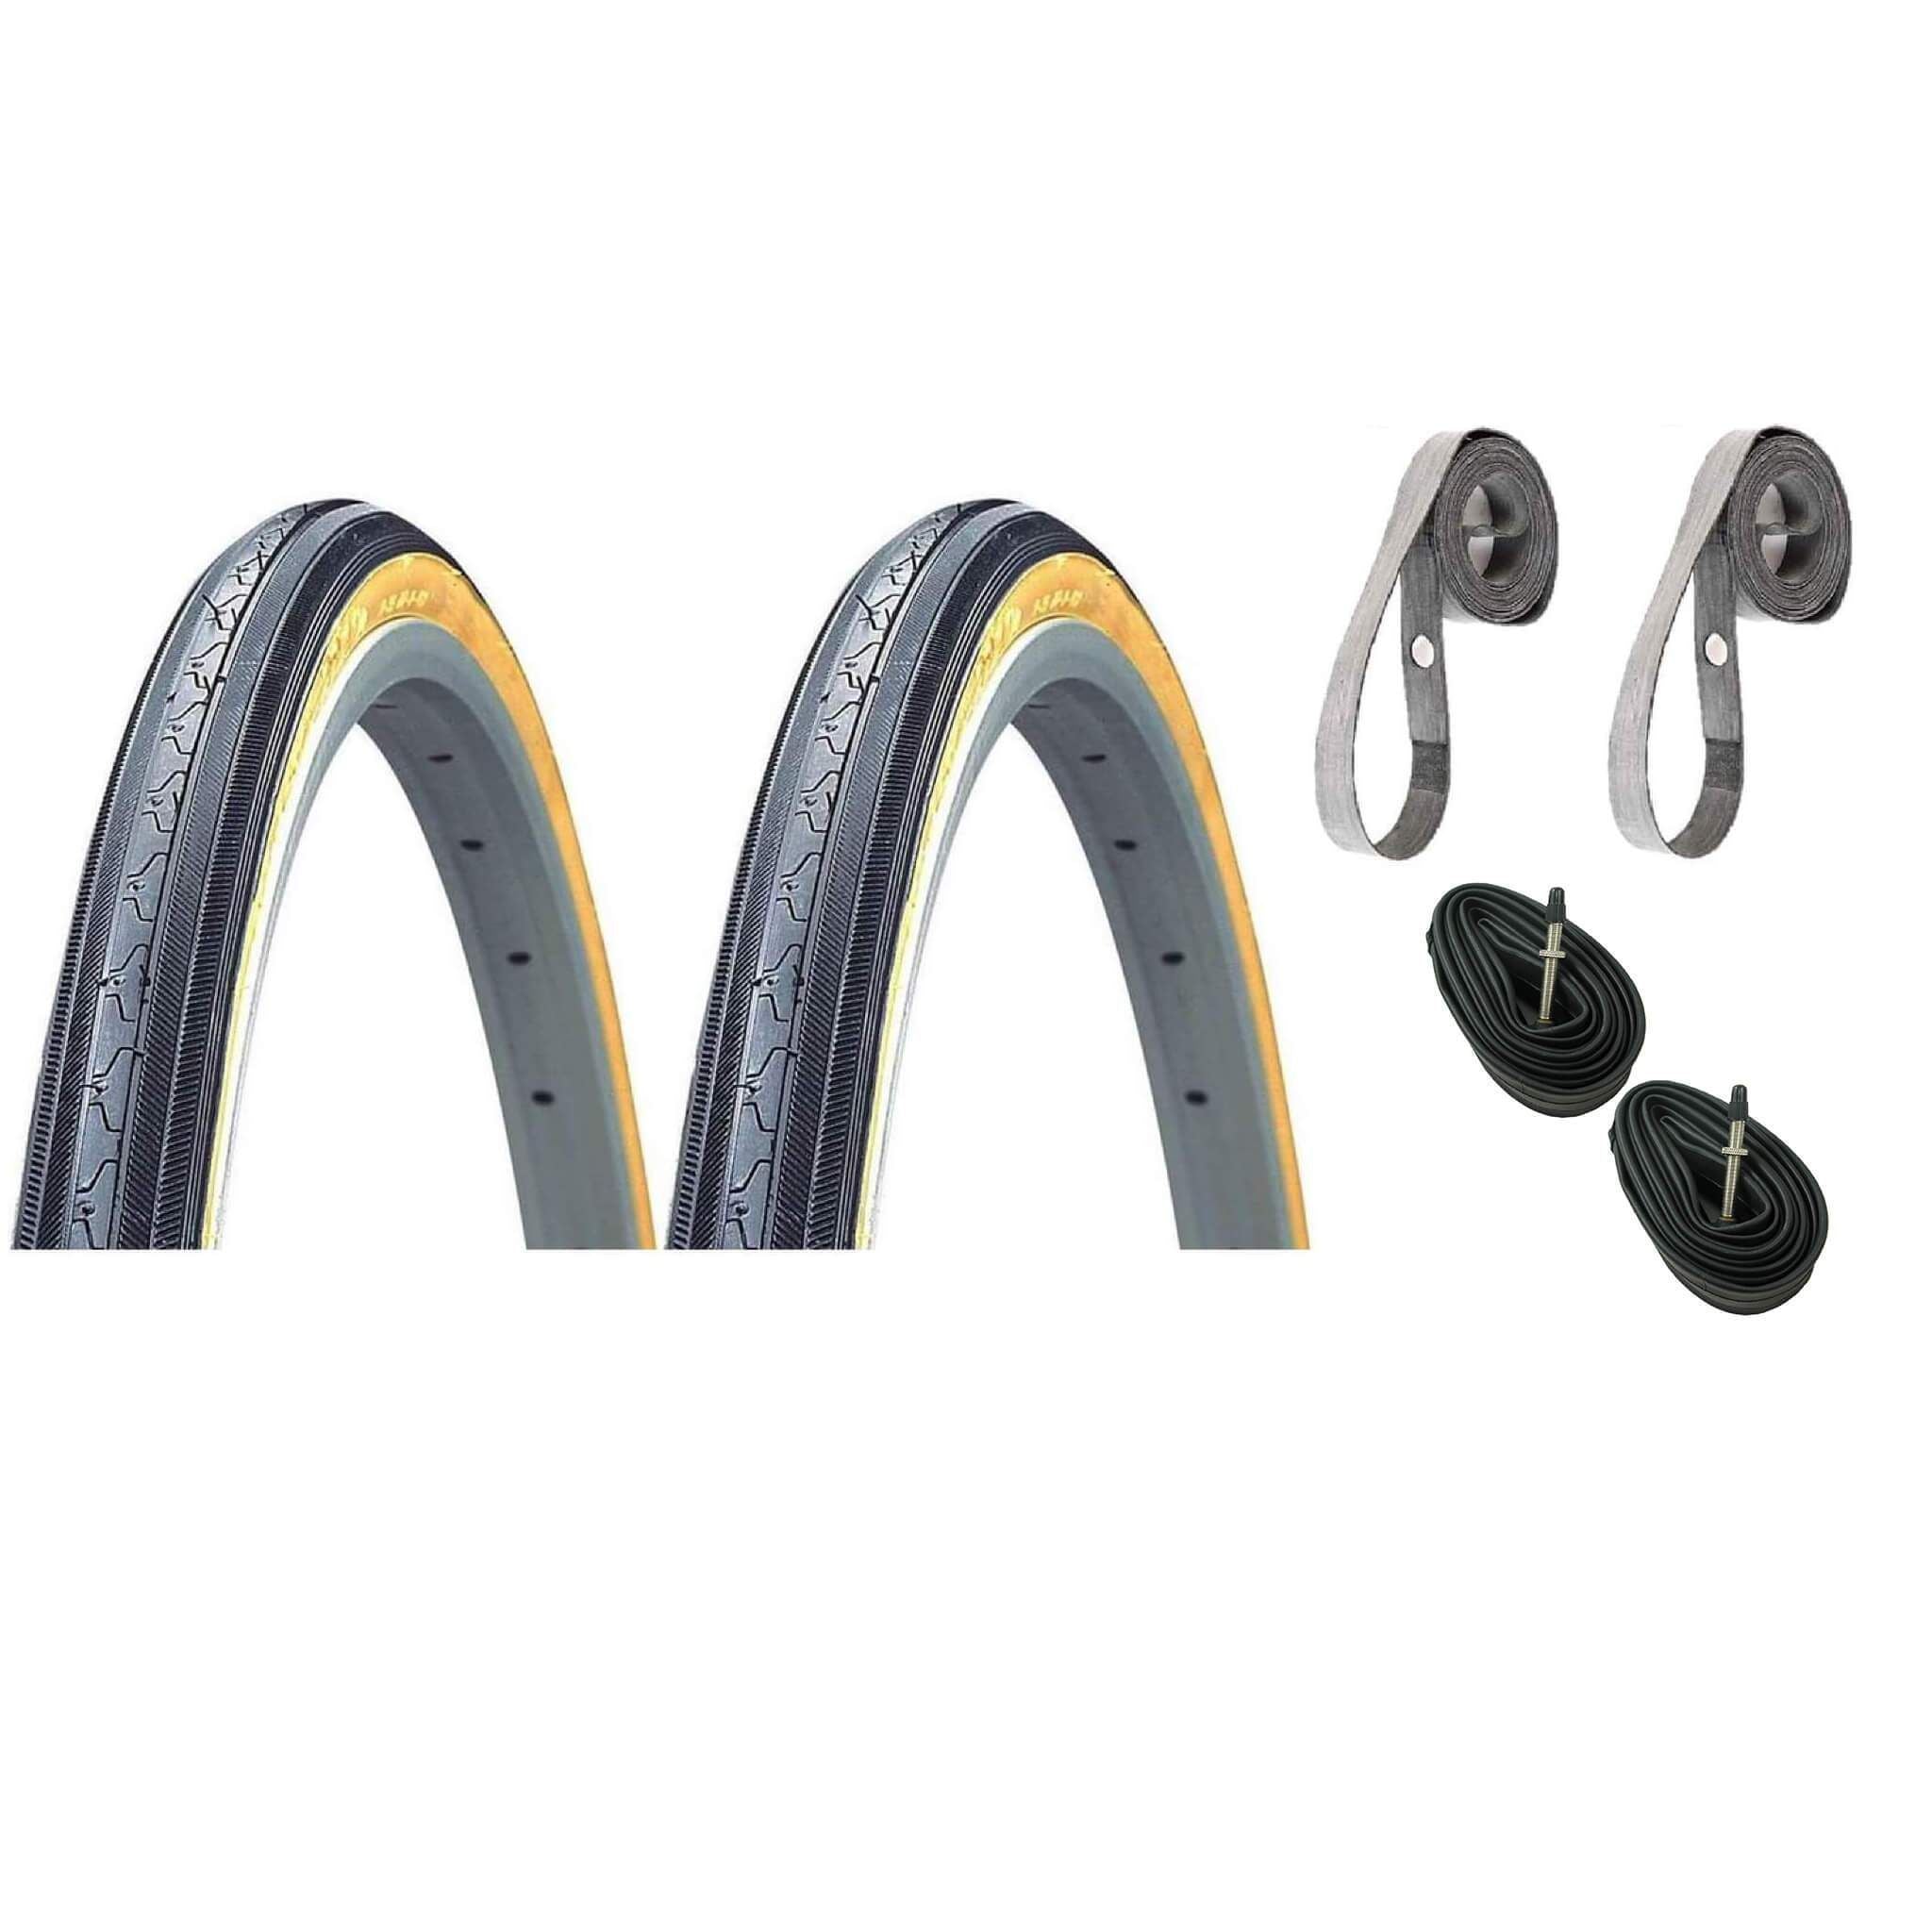 K35 27x1-1/4 Gum-wall Tire with Presta tube and rubber strips